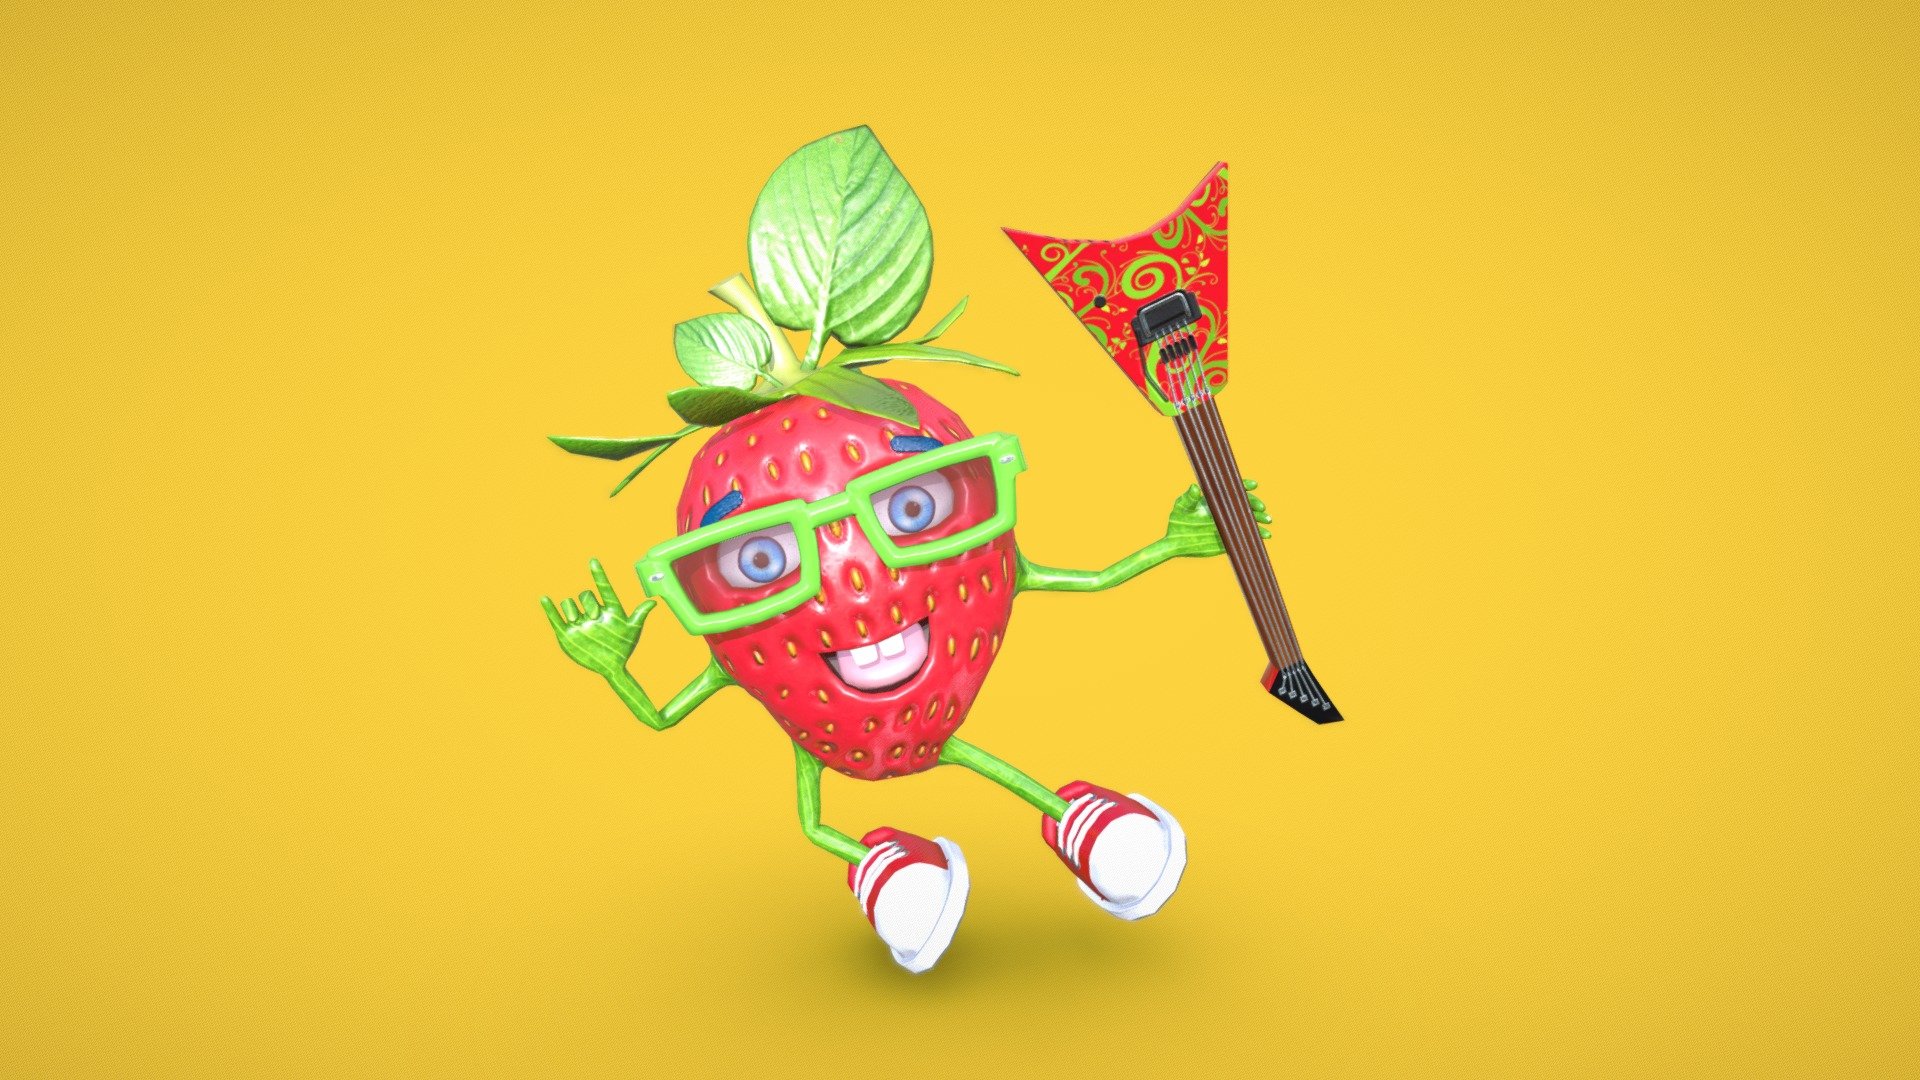 Rock star Strawberry low poly character for games and AR/VR.
created with the help of 3ds max, maya, photoshop, substance painter, zbrush.

check animation in unity:
https://youtu.be/NO3YA7JBm1w
https://youtu.be/aw4fTUYNBXA - Rock star Strawberry low poly character - 3D model by Harshit Prajapati (@harshit77) 3d model